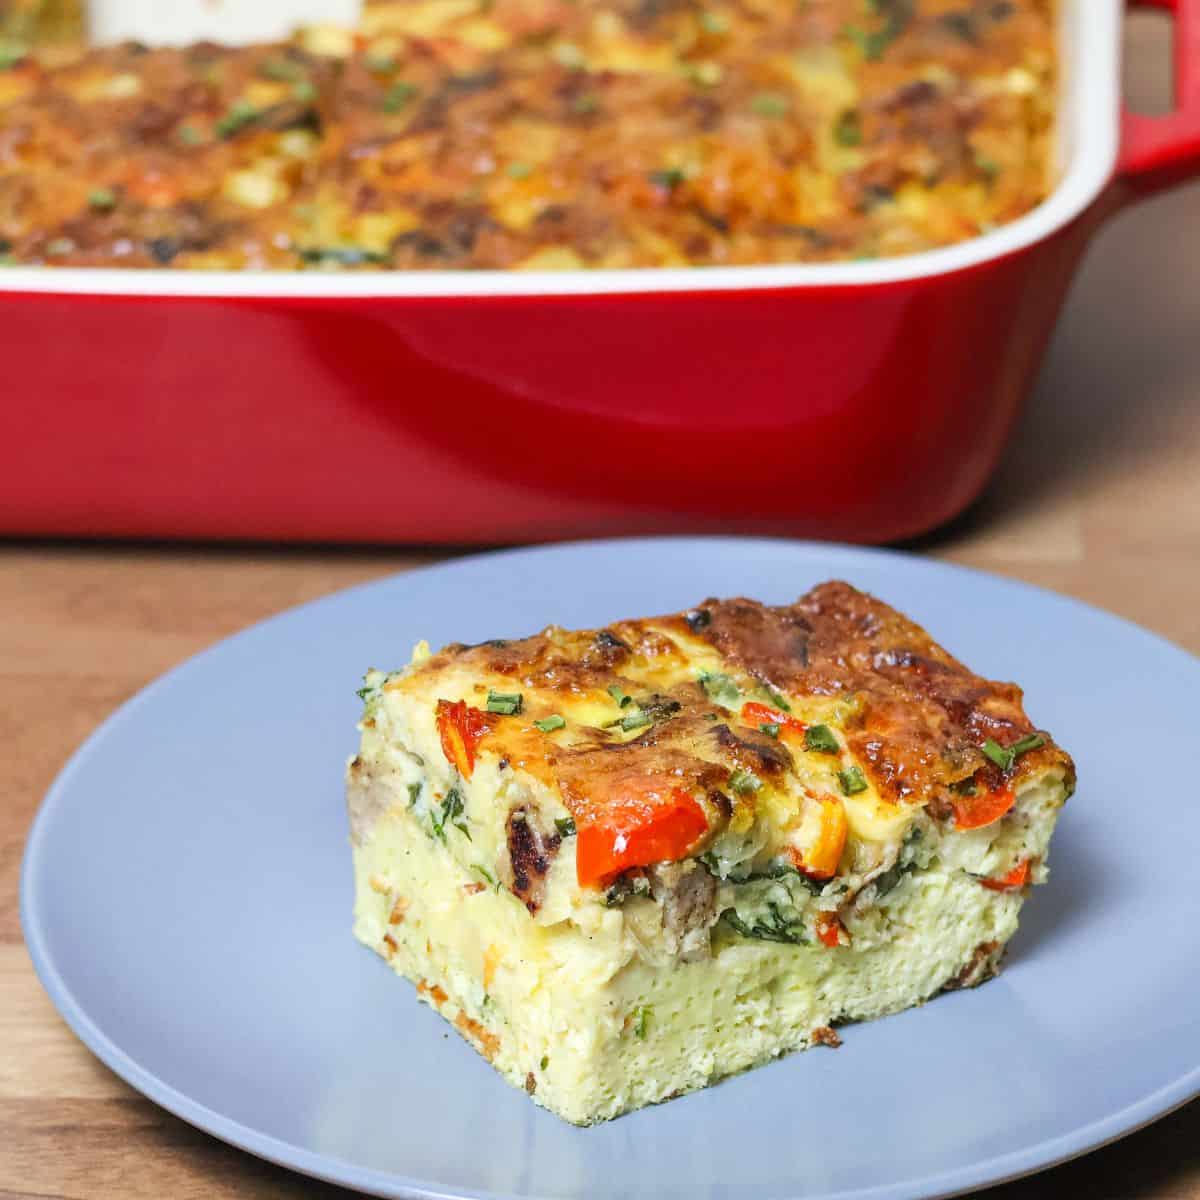 A full keto breakfast casserole in a red ceramic baking dish displayed on a wooden table, showing a top view of the baked, golden-brown crust with visible herbs.